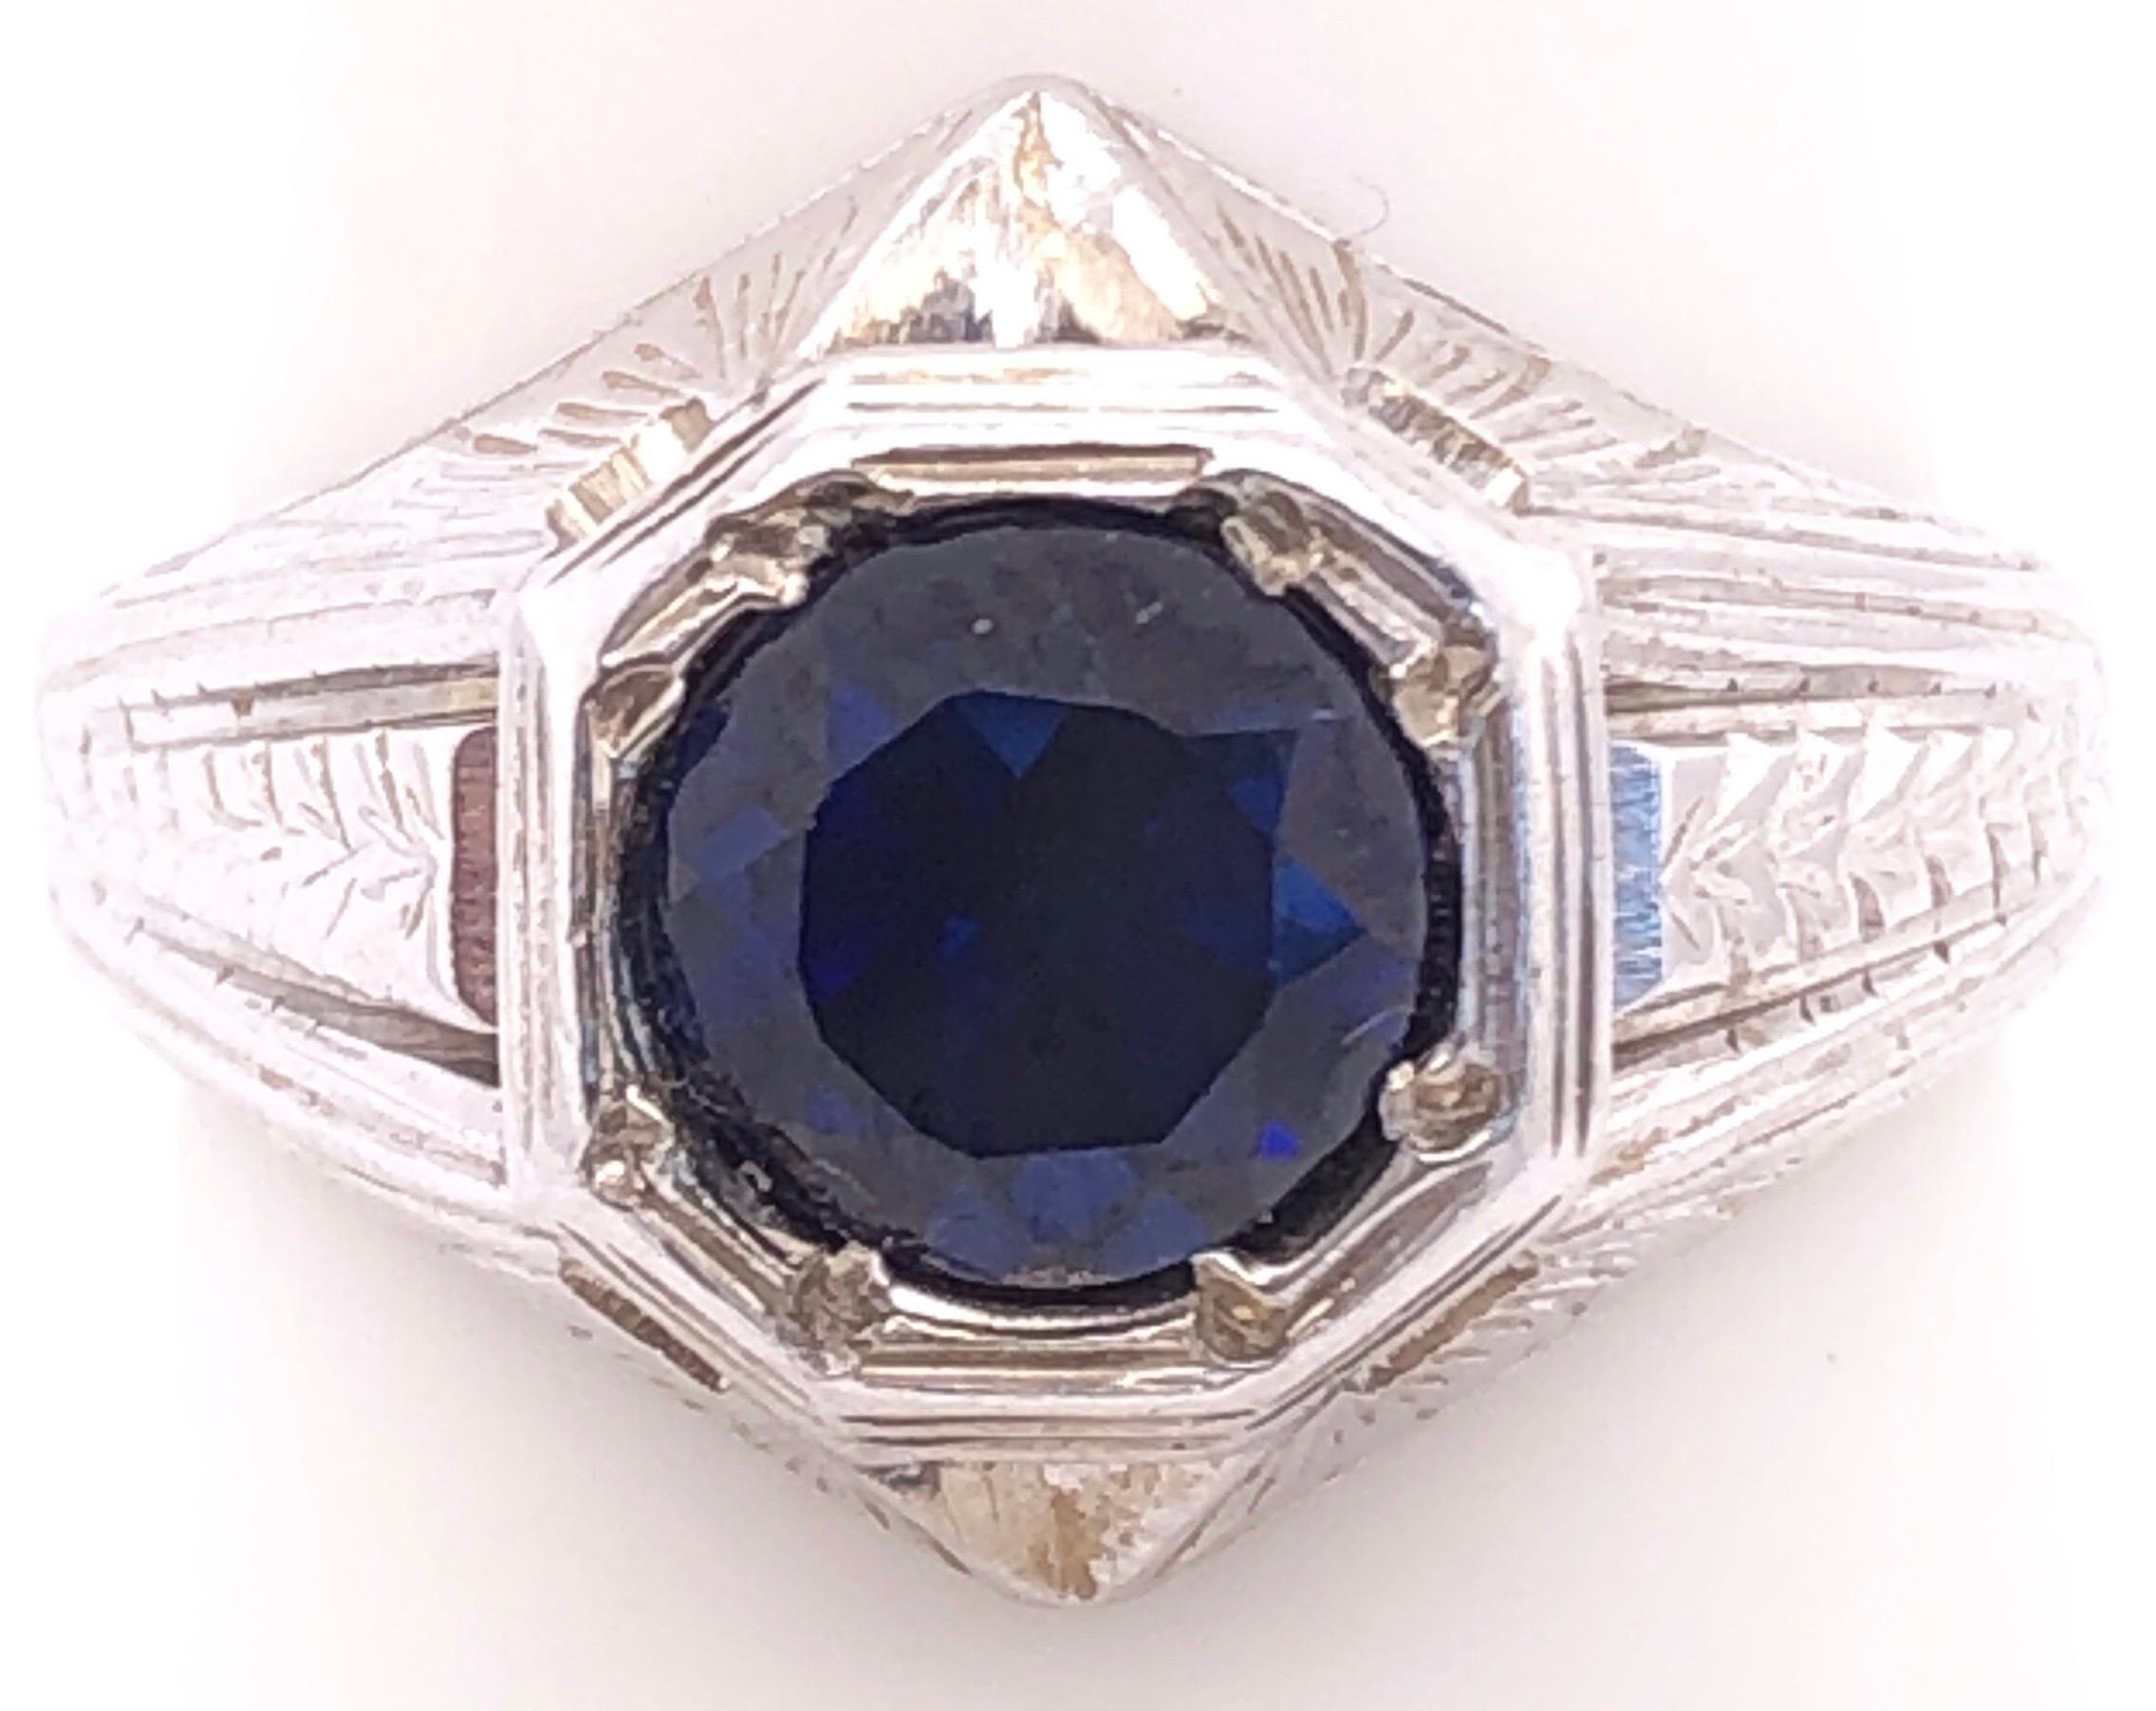 14 Karat White Gold Sapphire Solitaire Ring Size 8.25.
7.67 grams total weight.